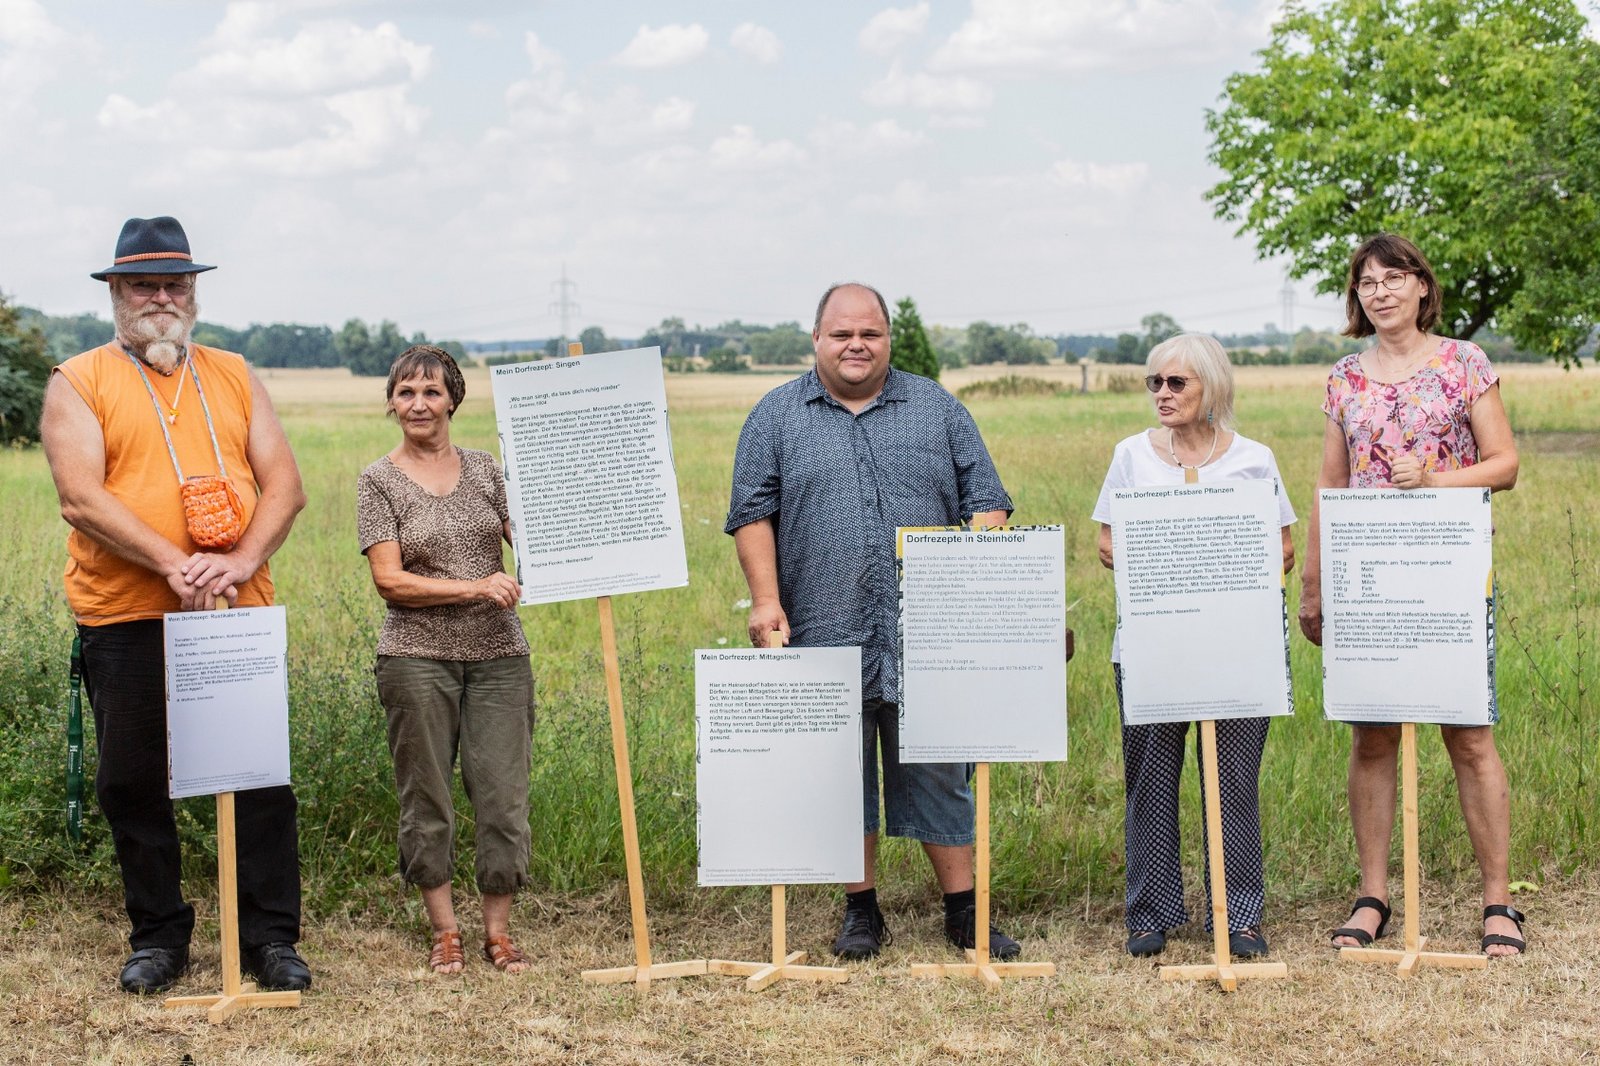 Several people from the New Patrons of Steinhöfel present their village recipes on large signs at the edge of a field 